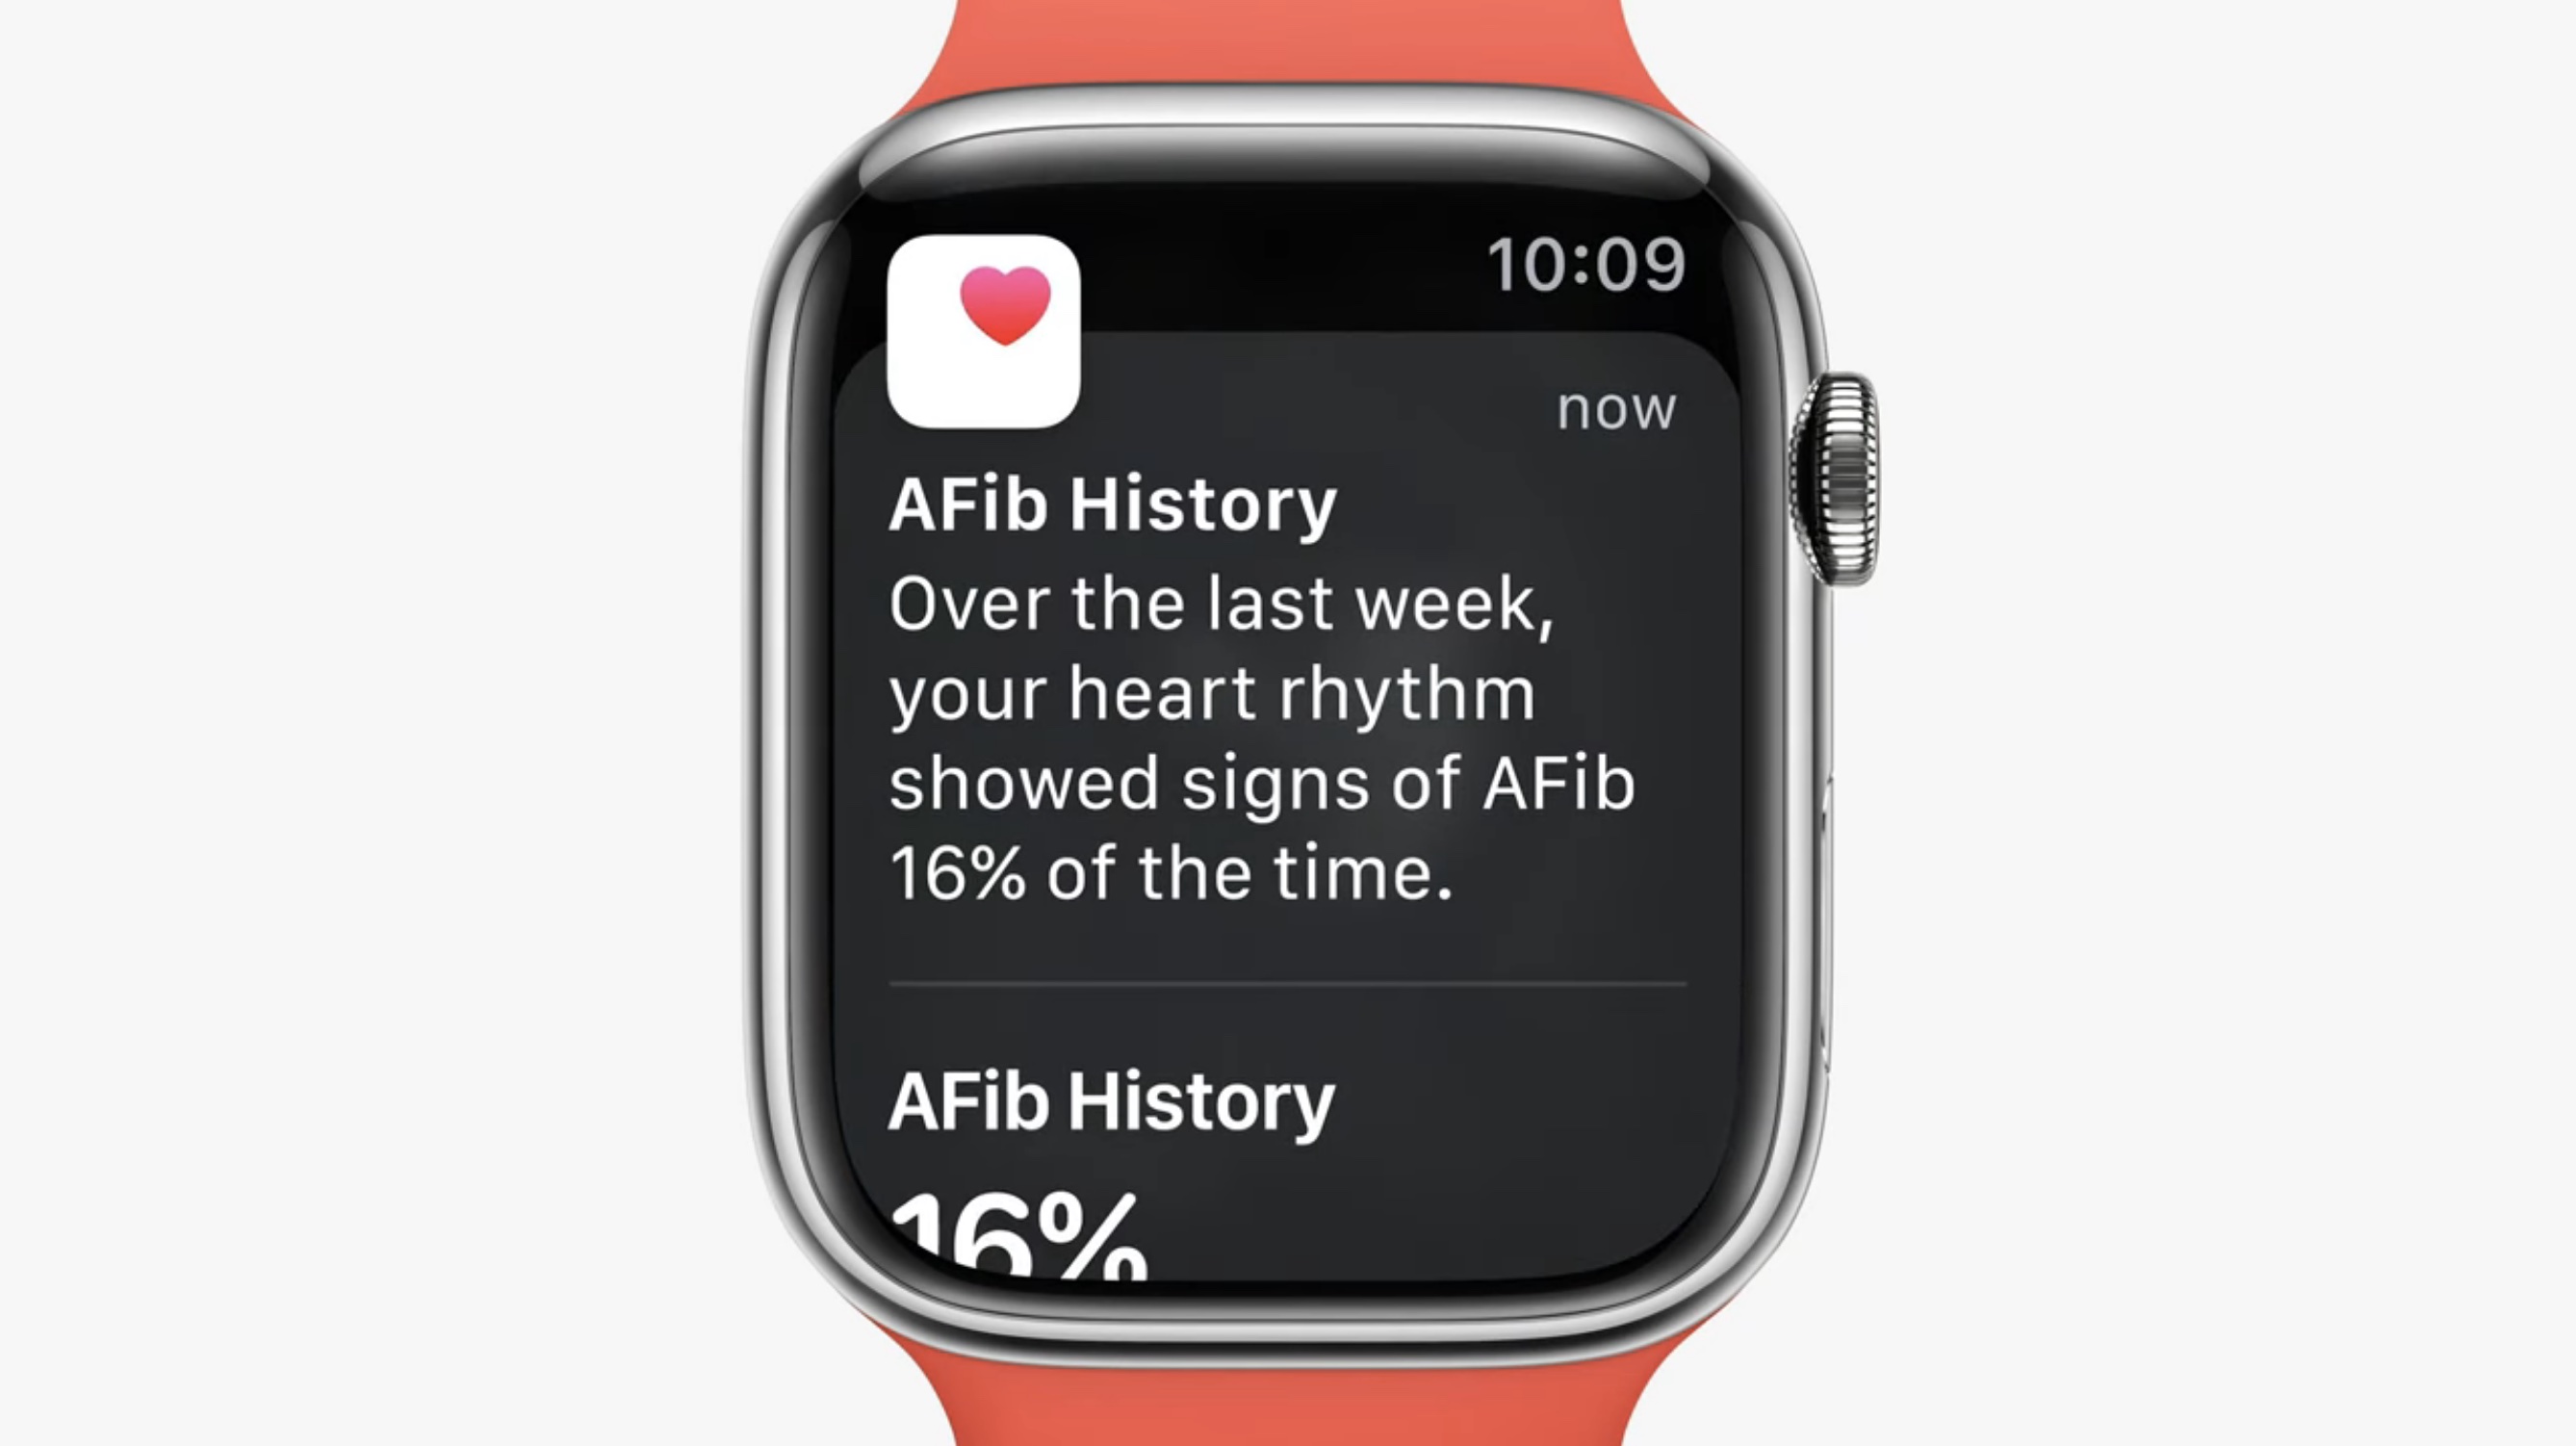 watchOS 9’s New AFib History Feature Expanding to Over 100 Countries